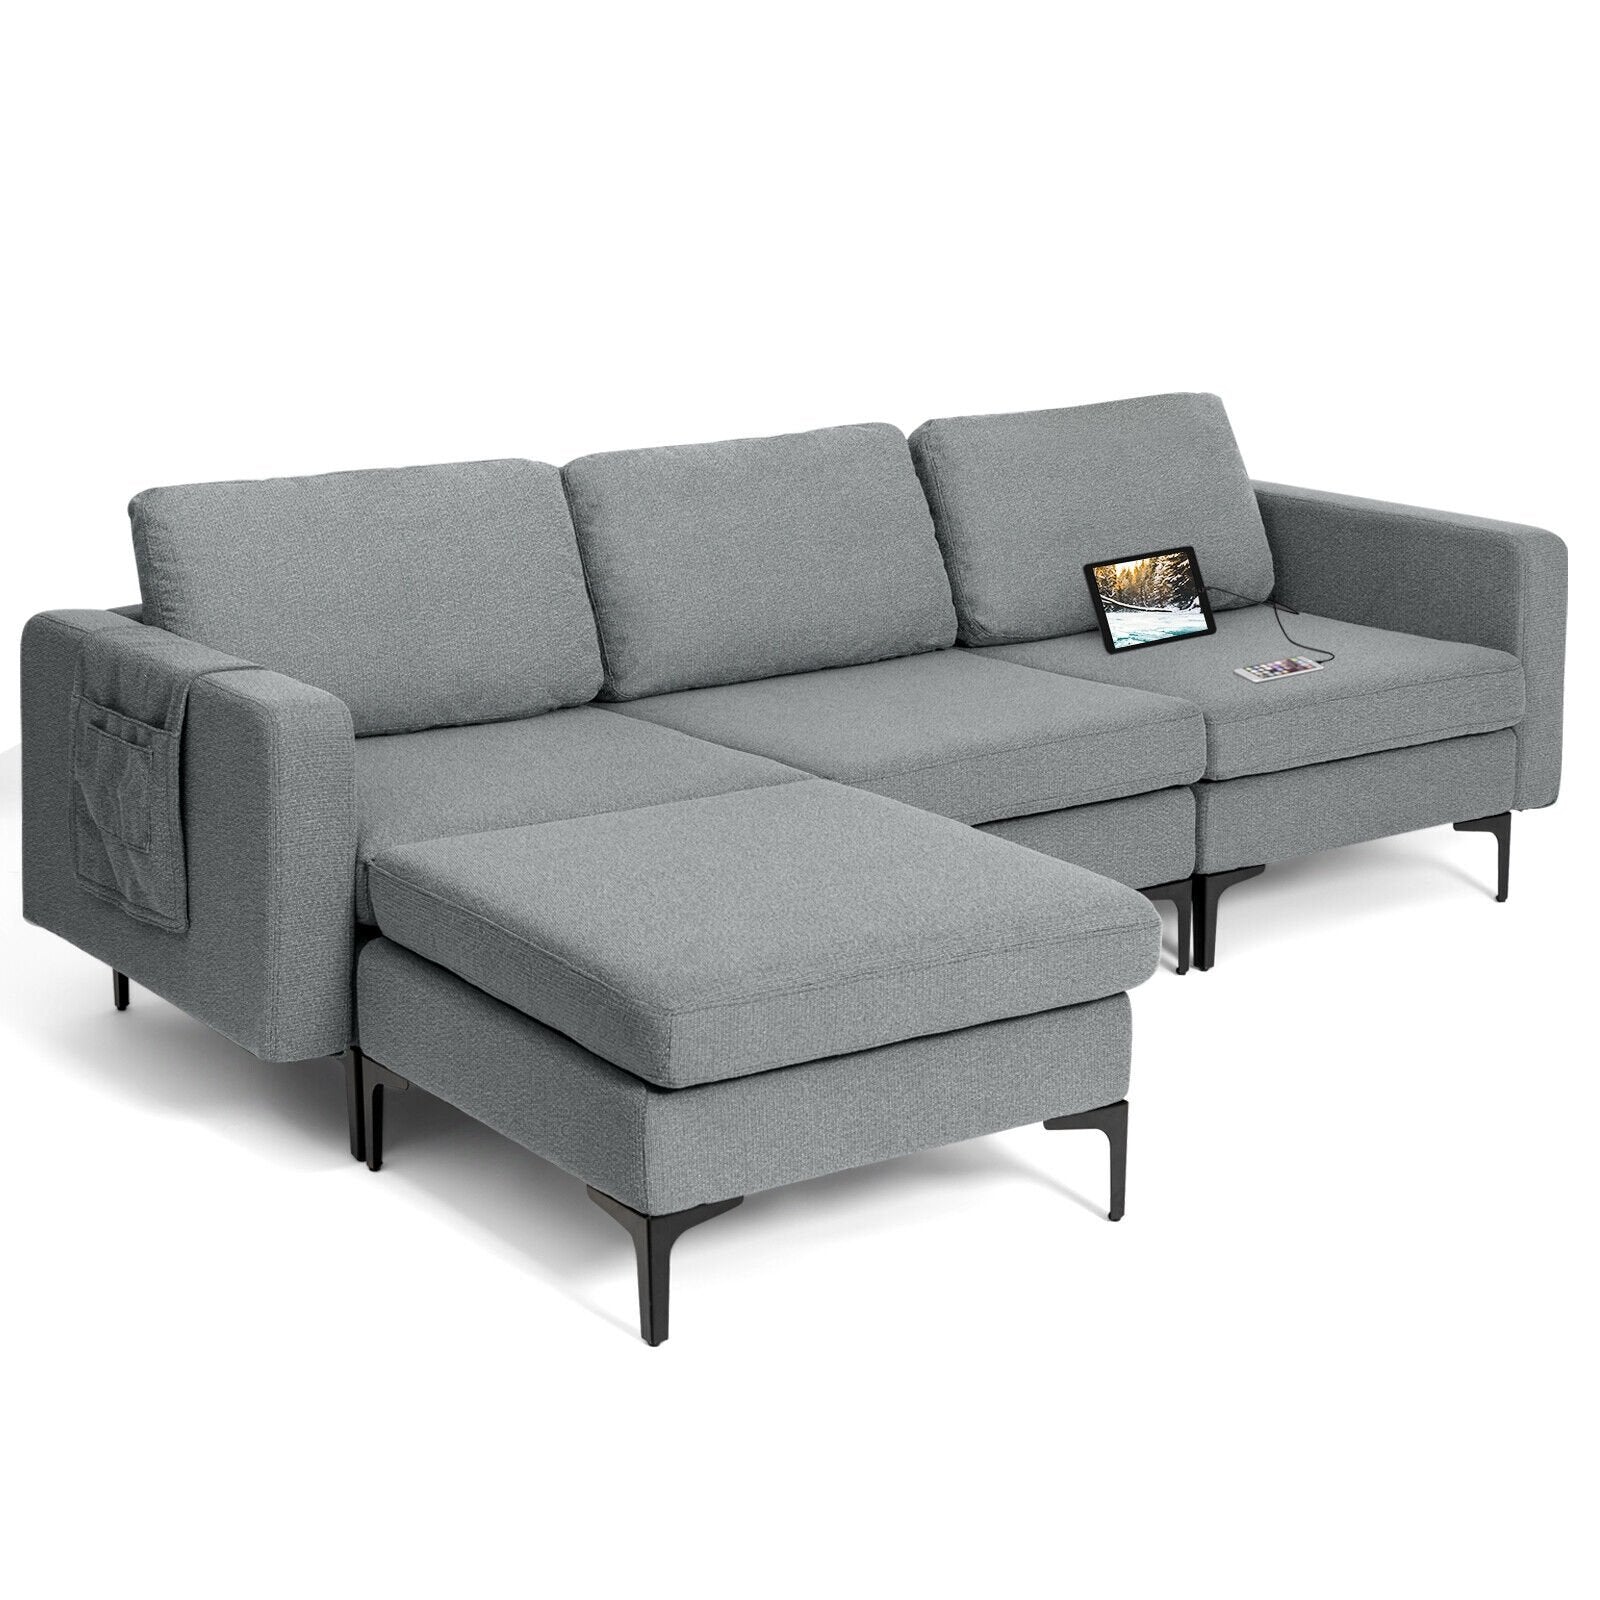 Modular L-shaped Sectional Sofa with Reversible Chaise and 2 USB Ports, Dark Gray - Gallery Canada